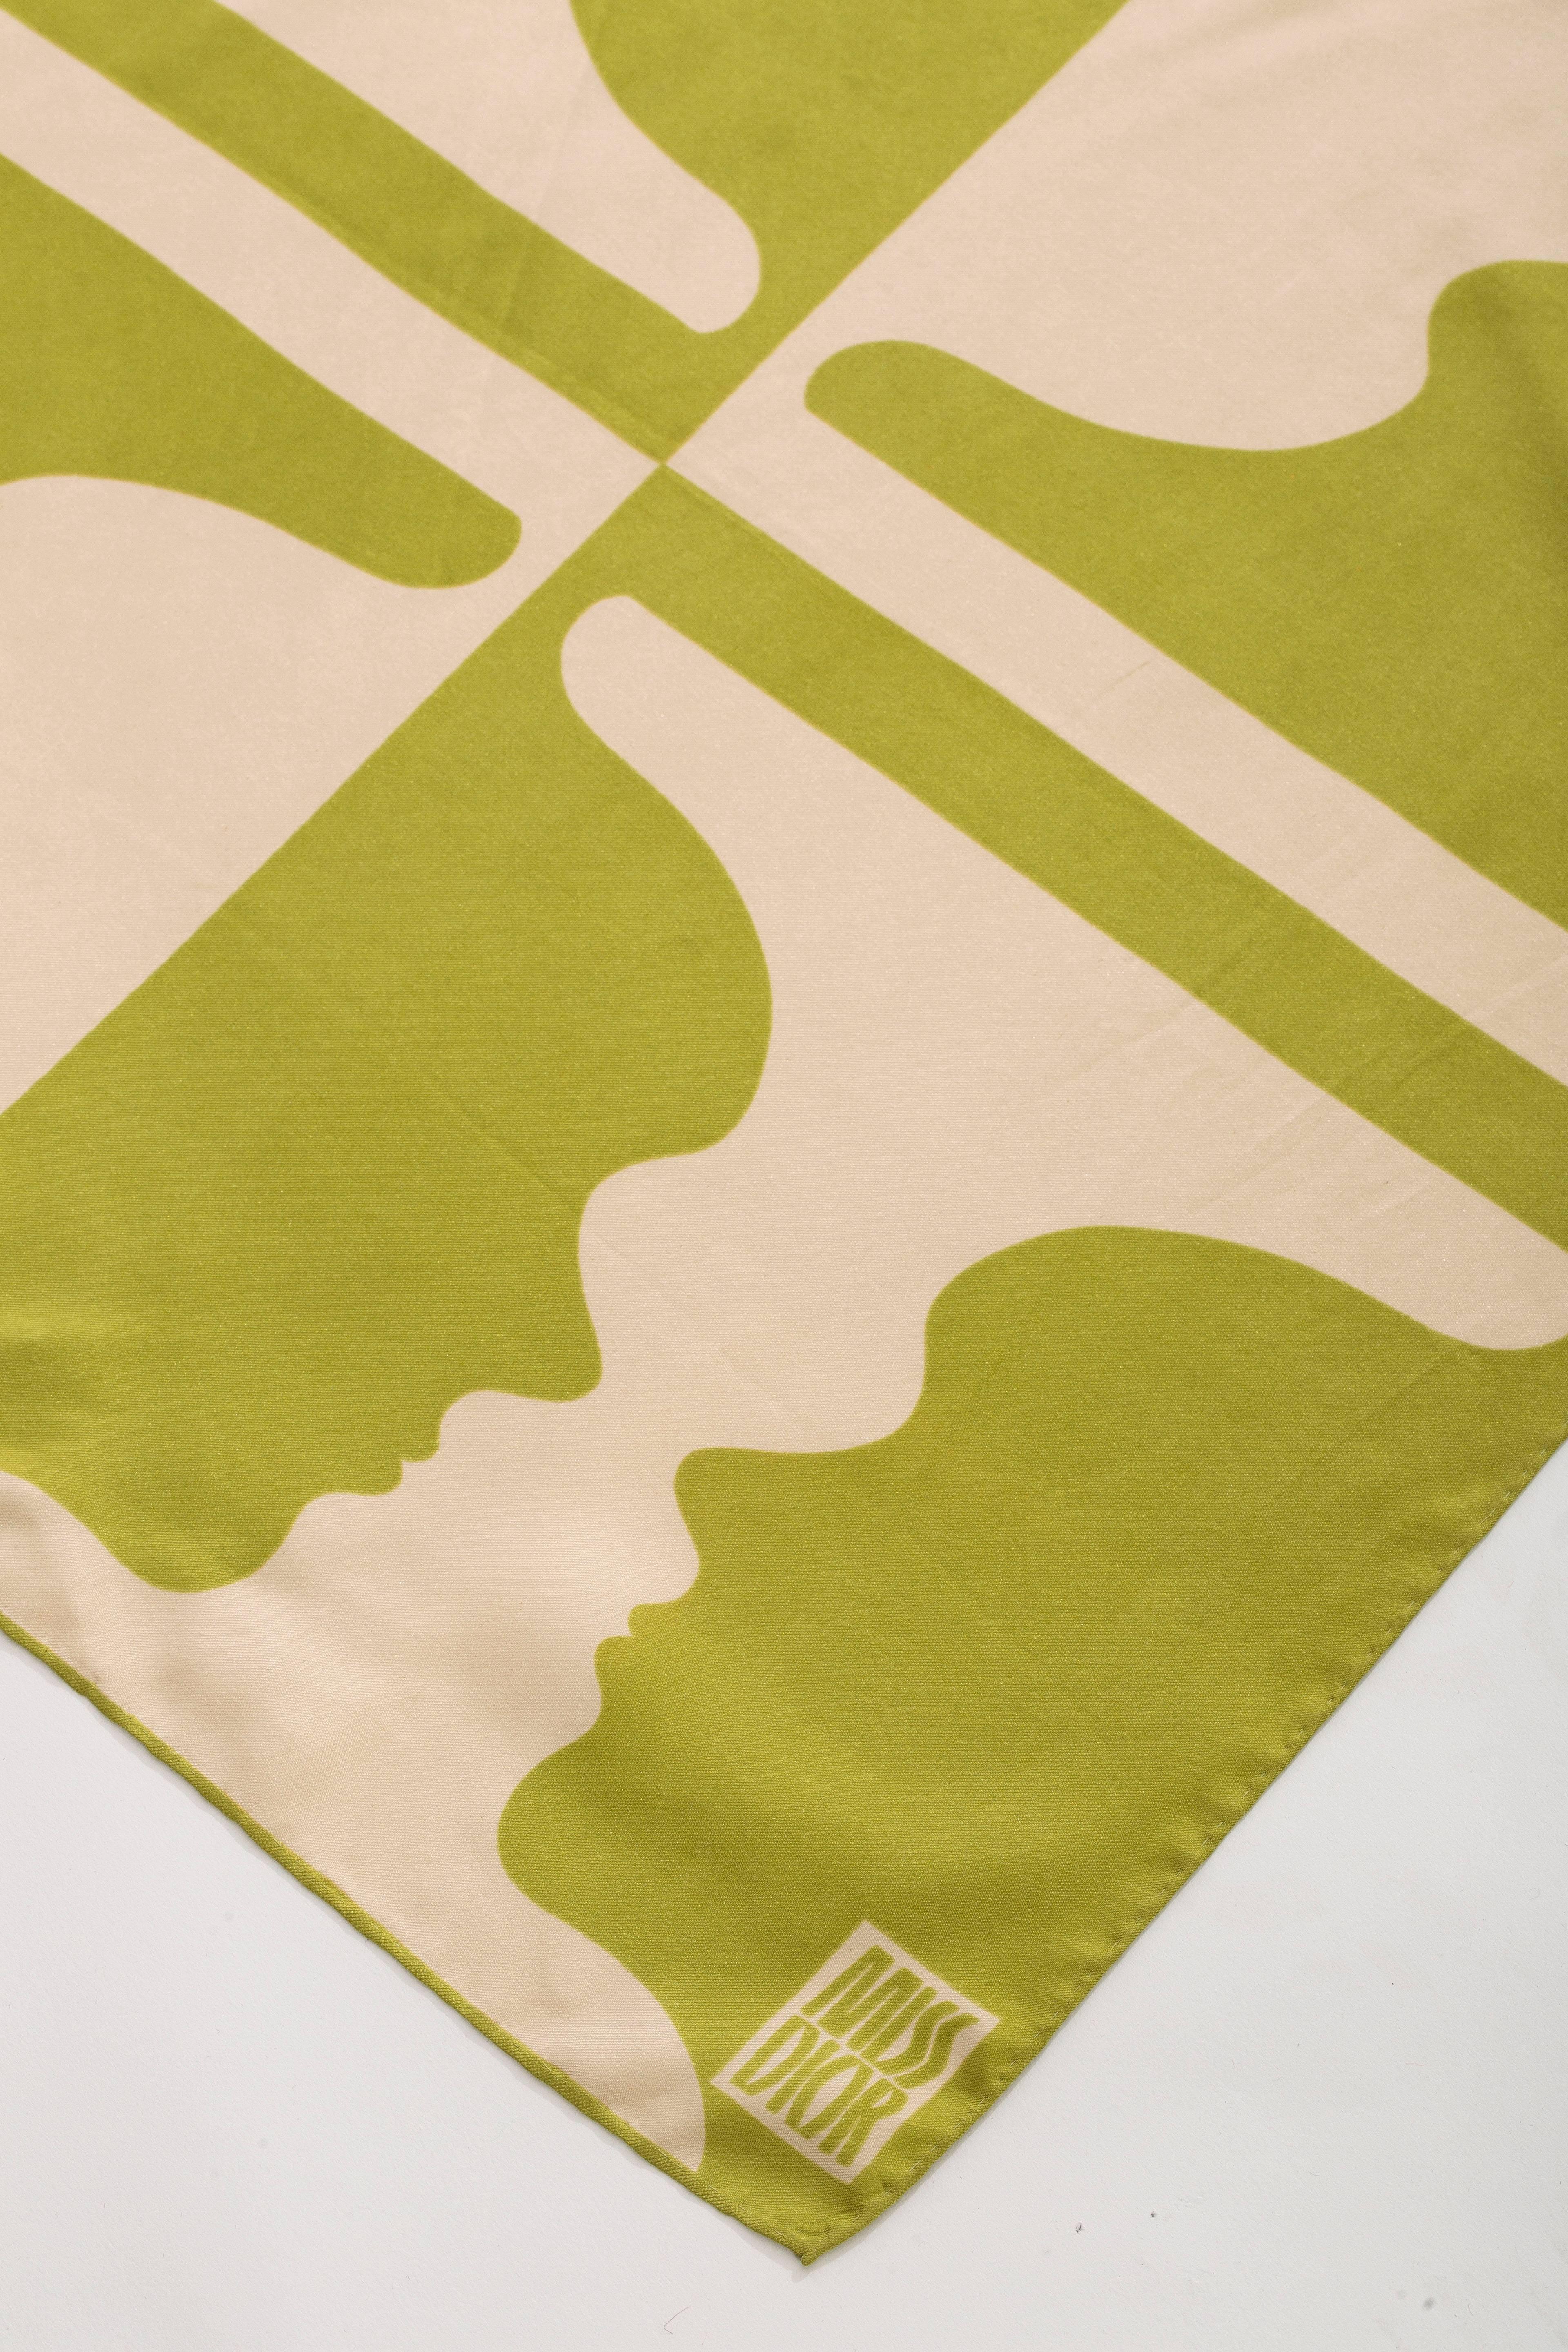 Beige Miss Dior Silk Scarf With Mirrored Profile Faces, Circa 1970's For Sale